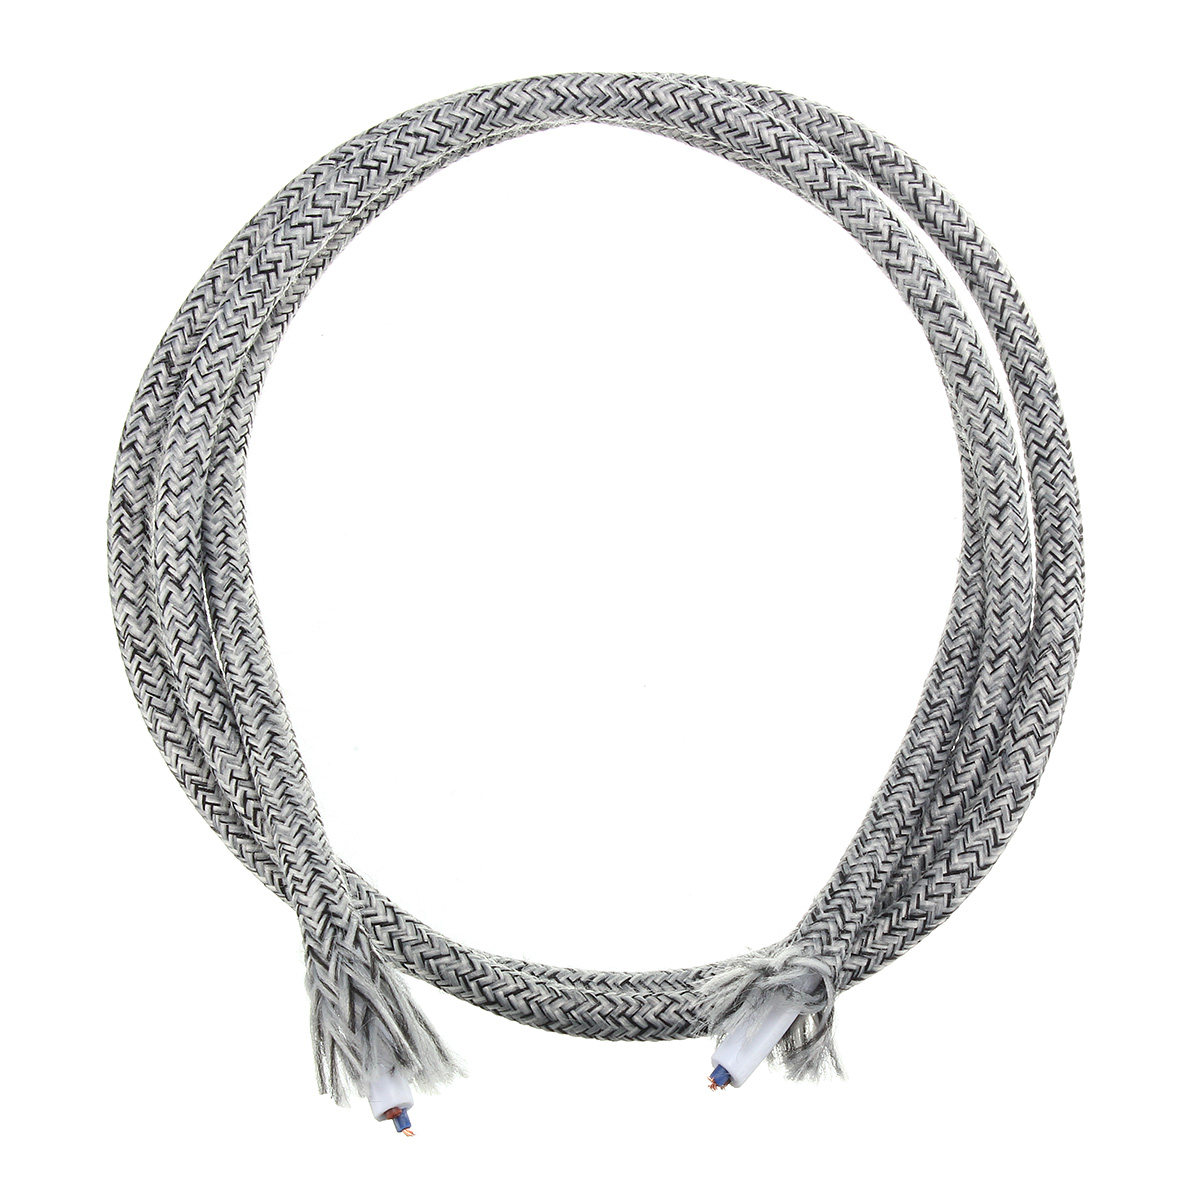 1M-2-Cord-Color-Vintage-Twist-Braided-Fabric-Light-Cable-Electric-Wire-1069141